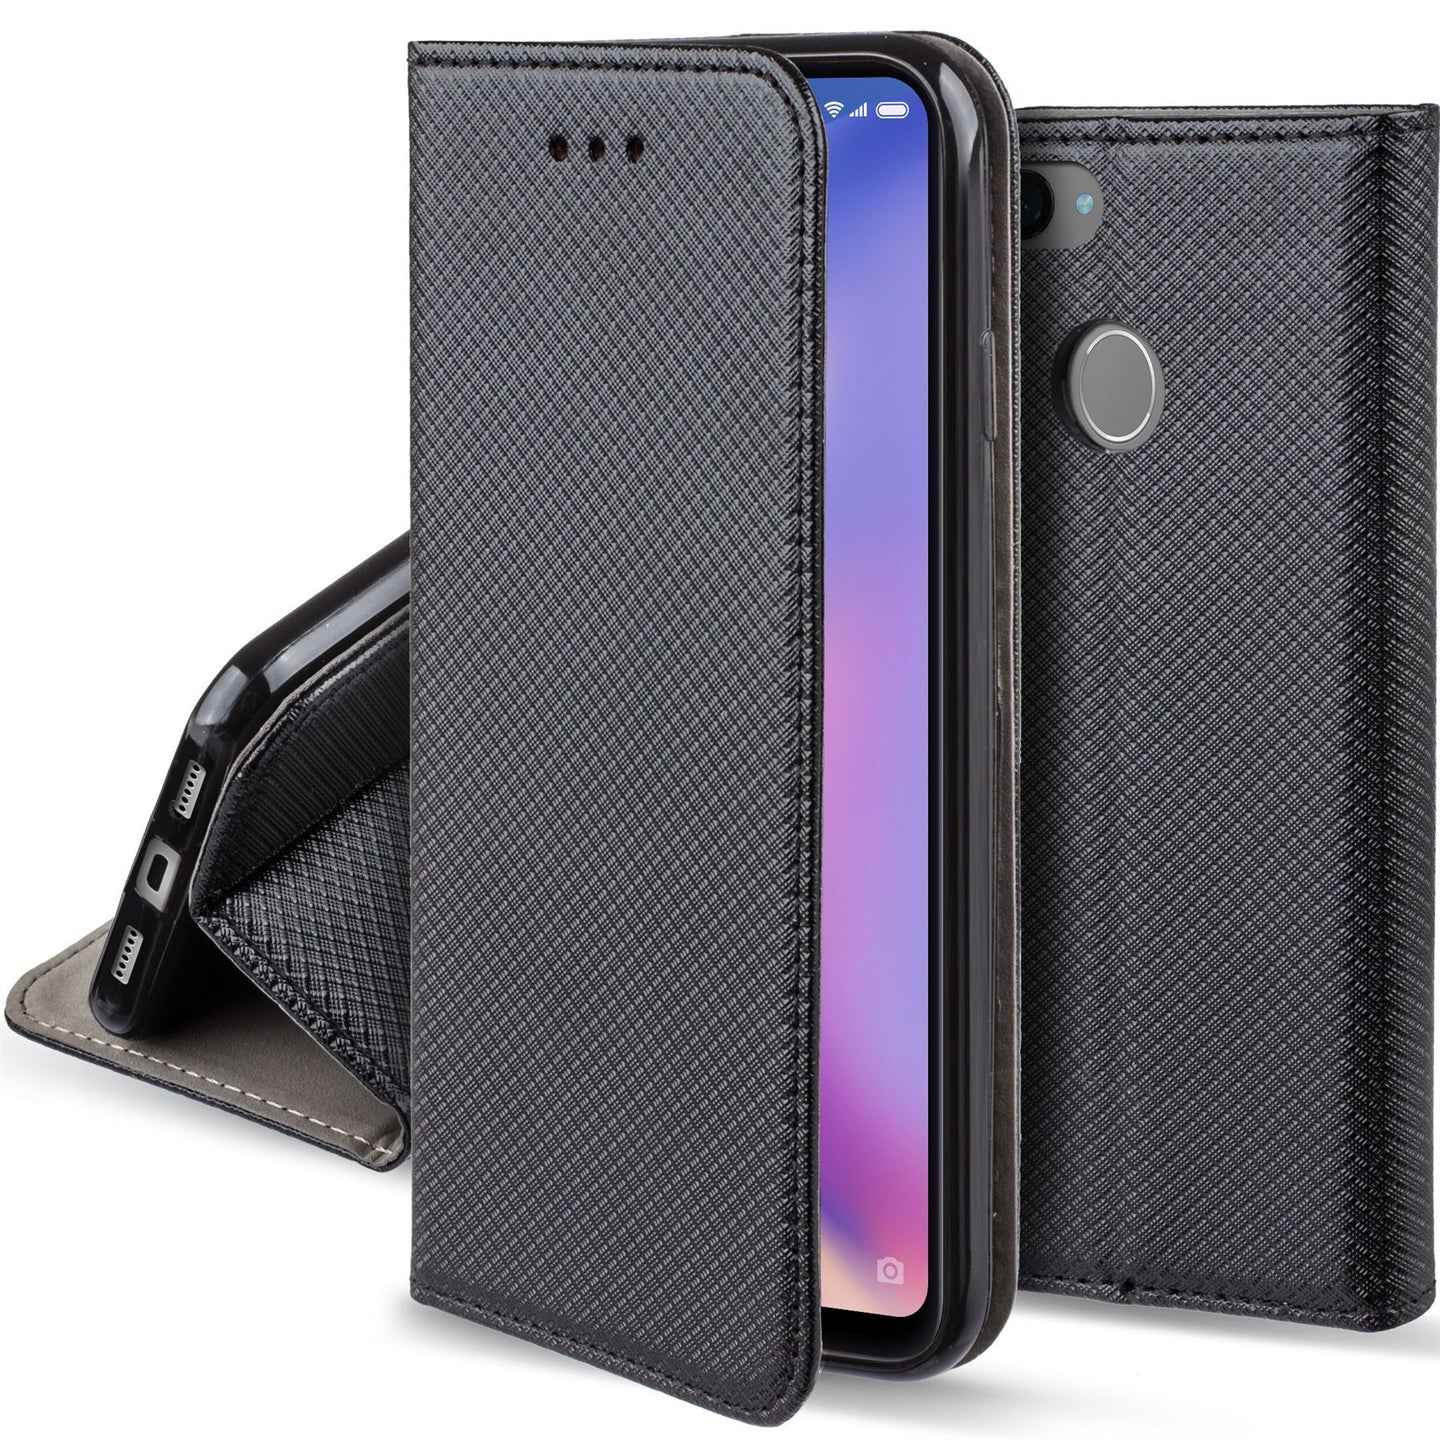 Moozy Case Flip Cover for Xiaomi Mi 8 Lite, Black - Smart Magnetic Flip Case with Card Holder and Stand